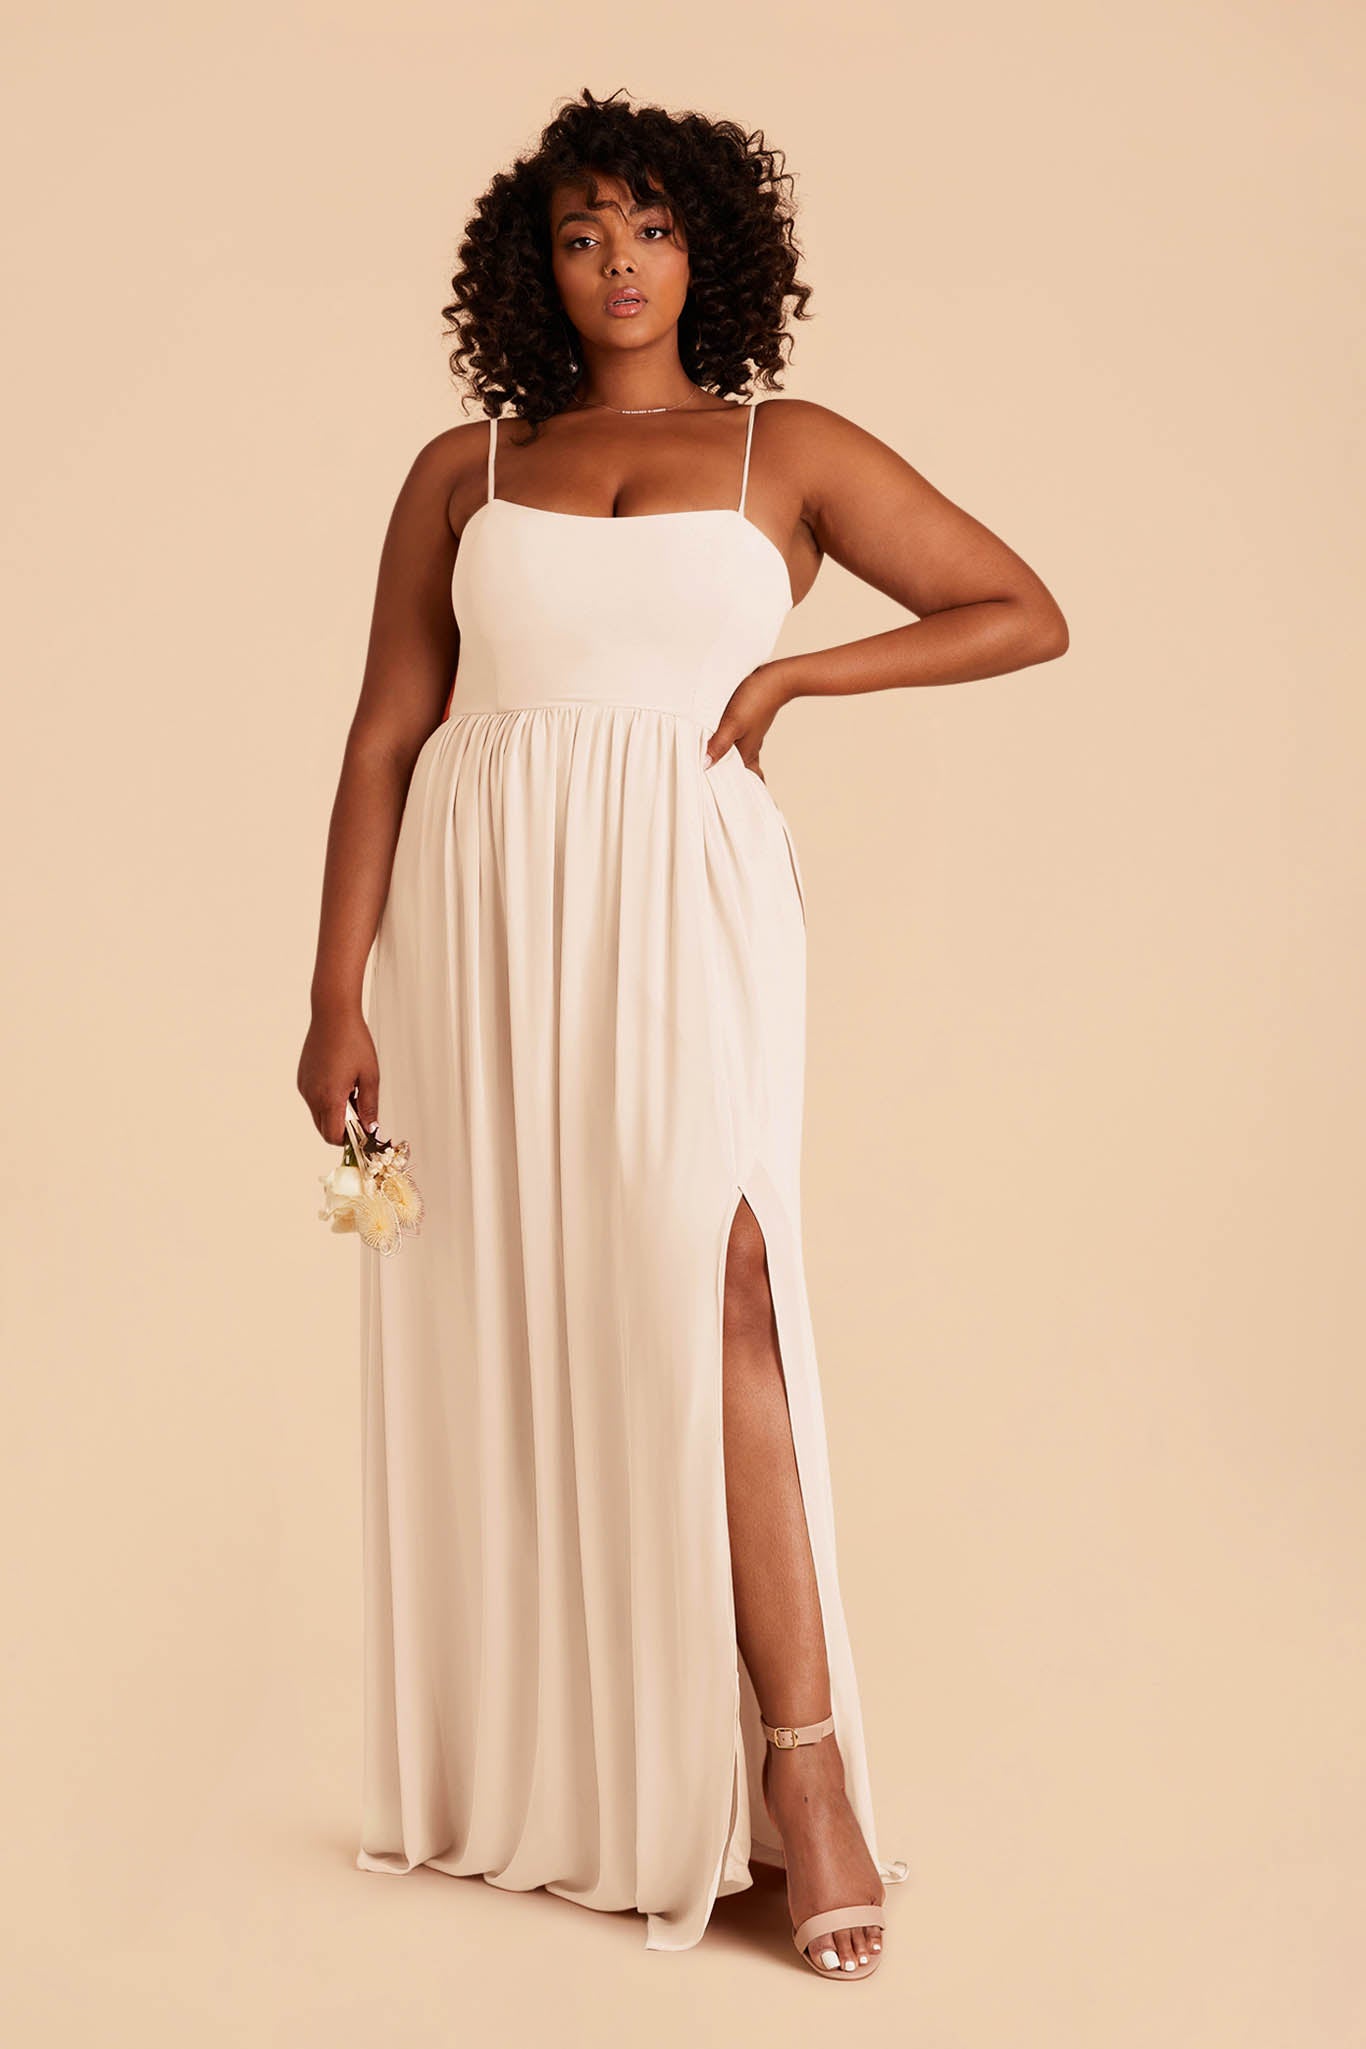 Champagne August Convertible Dress by Birdy Grey